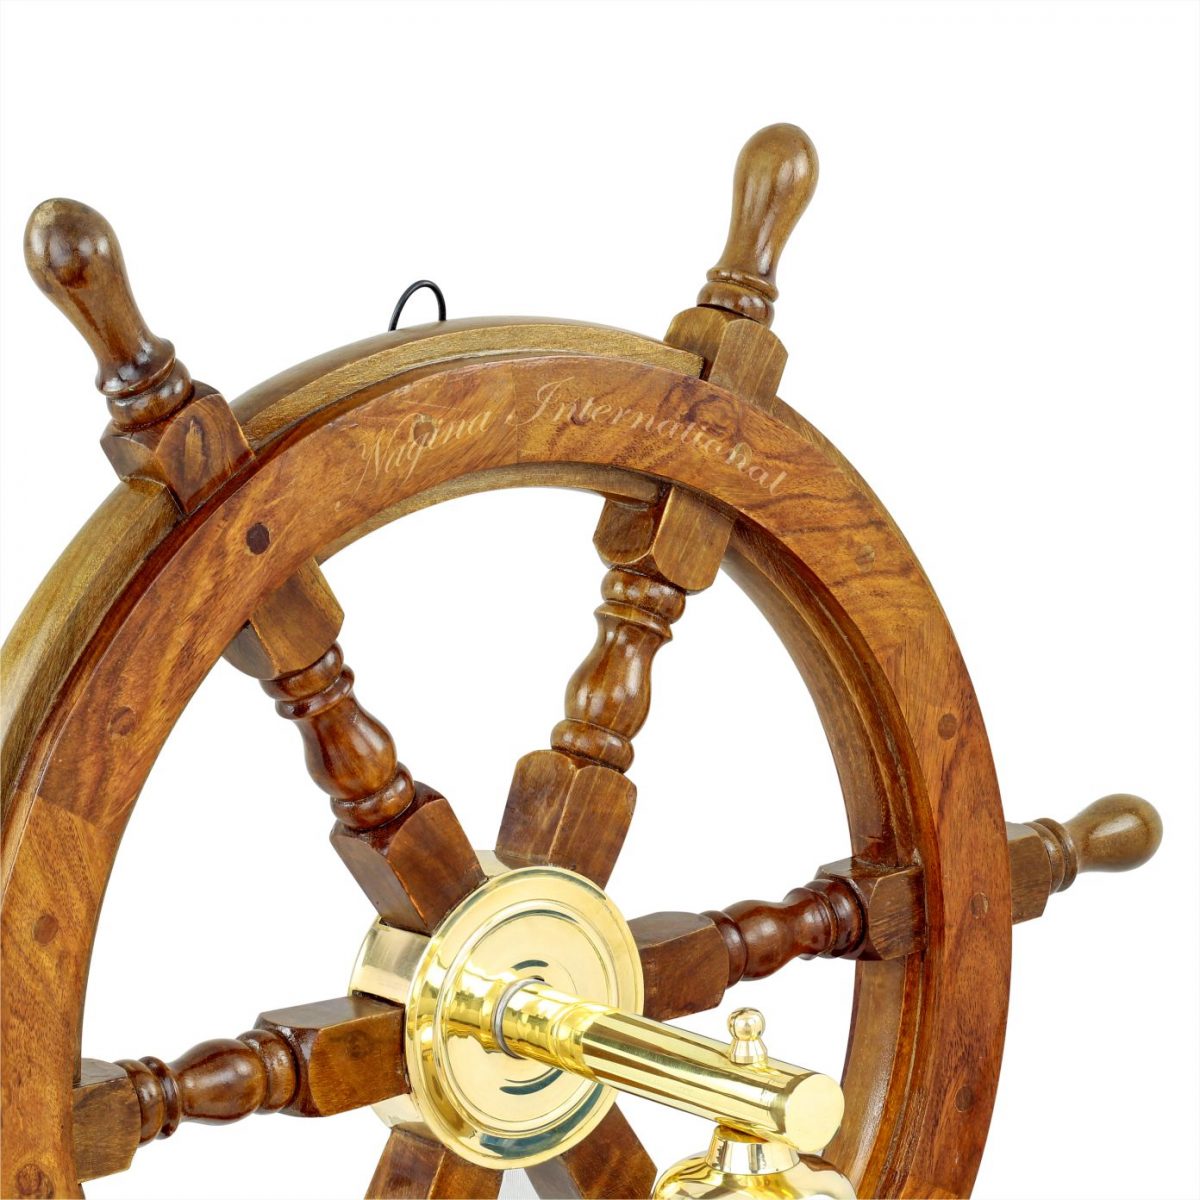 Marine Handicraft's Brown Polish 24 Inch Beautiful Wooden Ship Wheel with Brass Ring,For Boat,Ship Steering and home wall DecorBrass Nautical Wall Decor Gift 